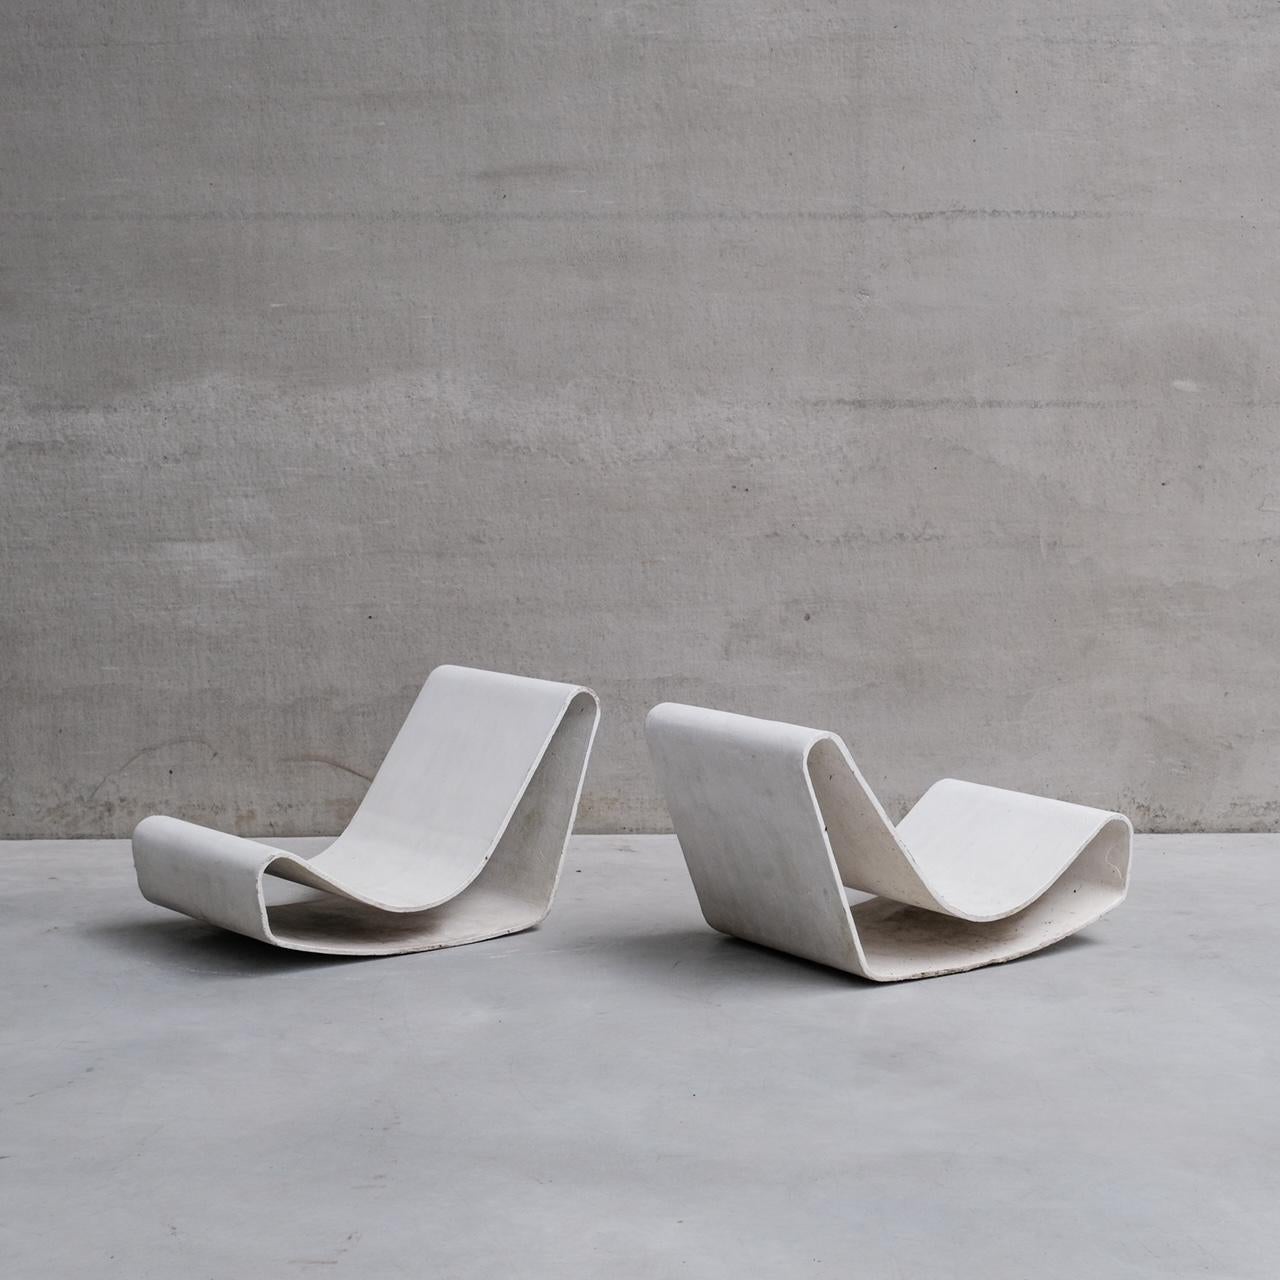 A set of 'Loop' lounge/garden chairs by Willy Guhl.

A continuous sheet of concrete, these were used predominately indoors and summer time and were kept in immaculate condition relative to their age.

Switzerland, c1950s.

Exceptional timeless